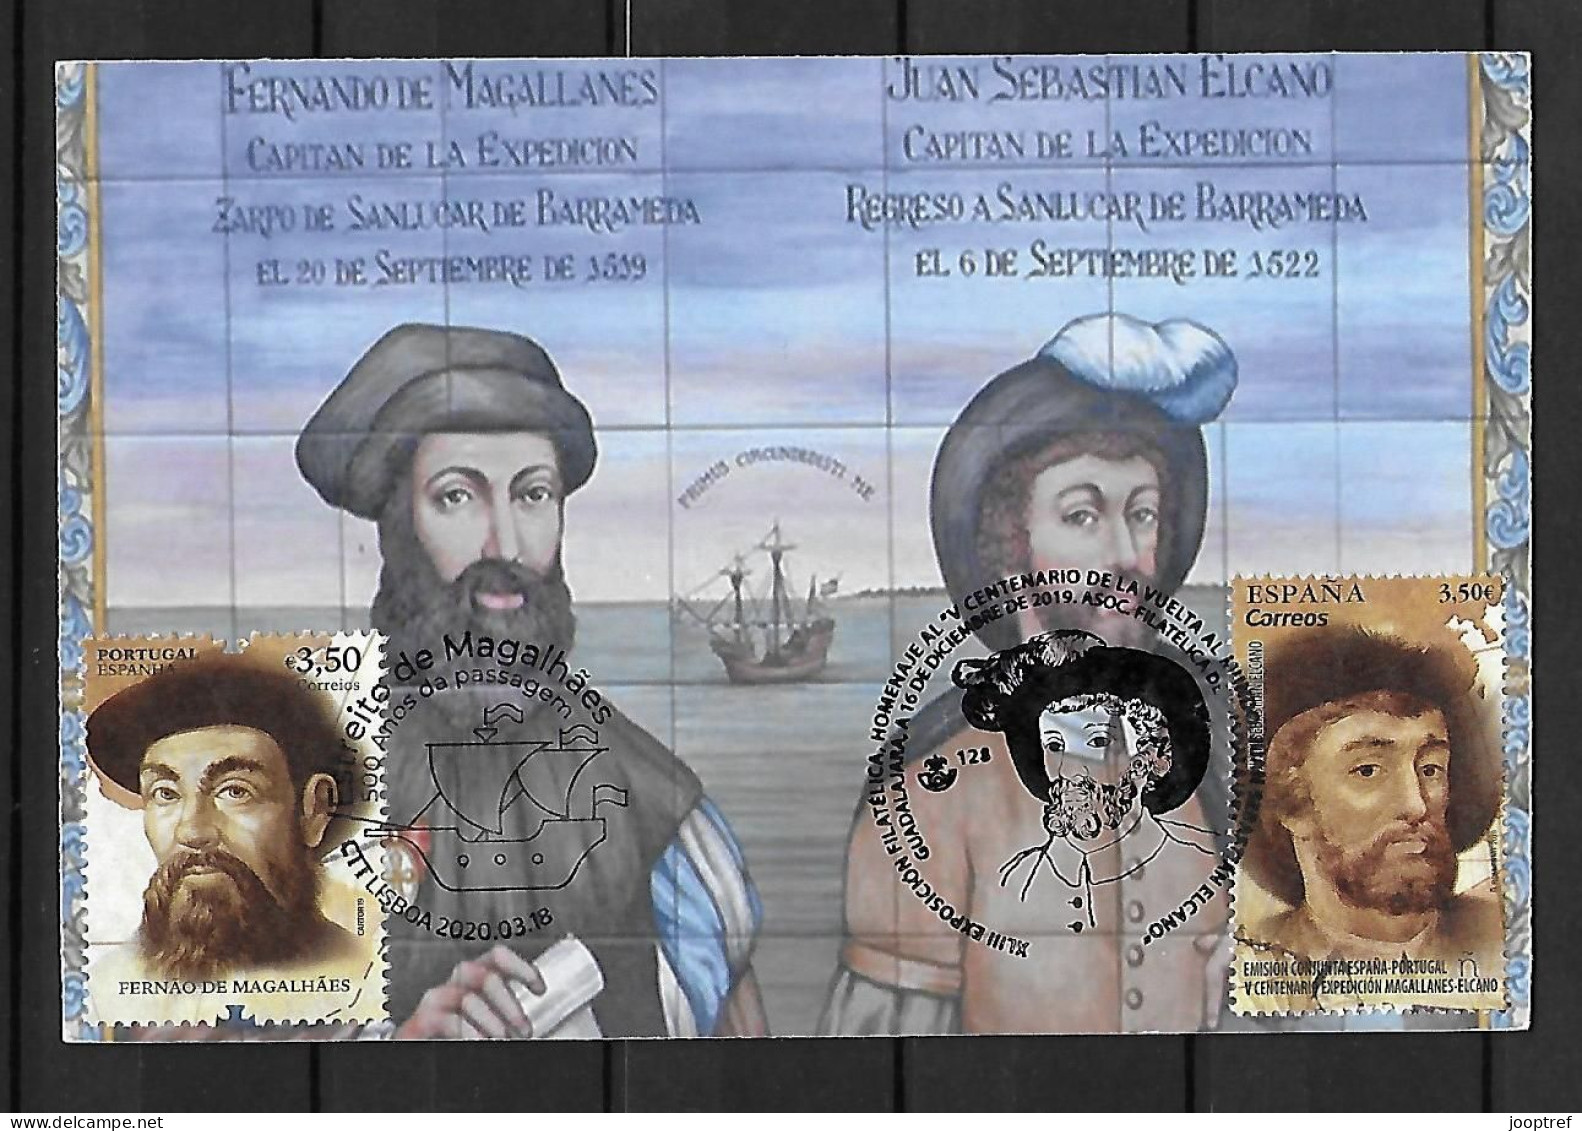 2019 Joint Portugal And Spain, MIXED FDC MAXIMUM CARD WITH BOTH STAMPS: 500 Years Magellan-Elcano Expedition - Gezamelijke Uitgaven